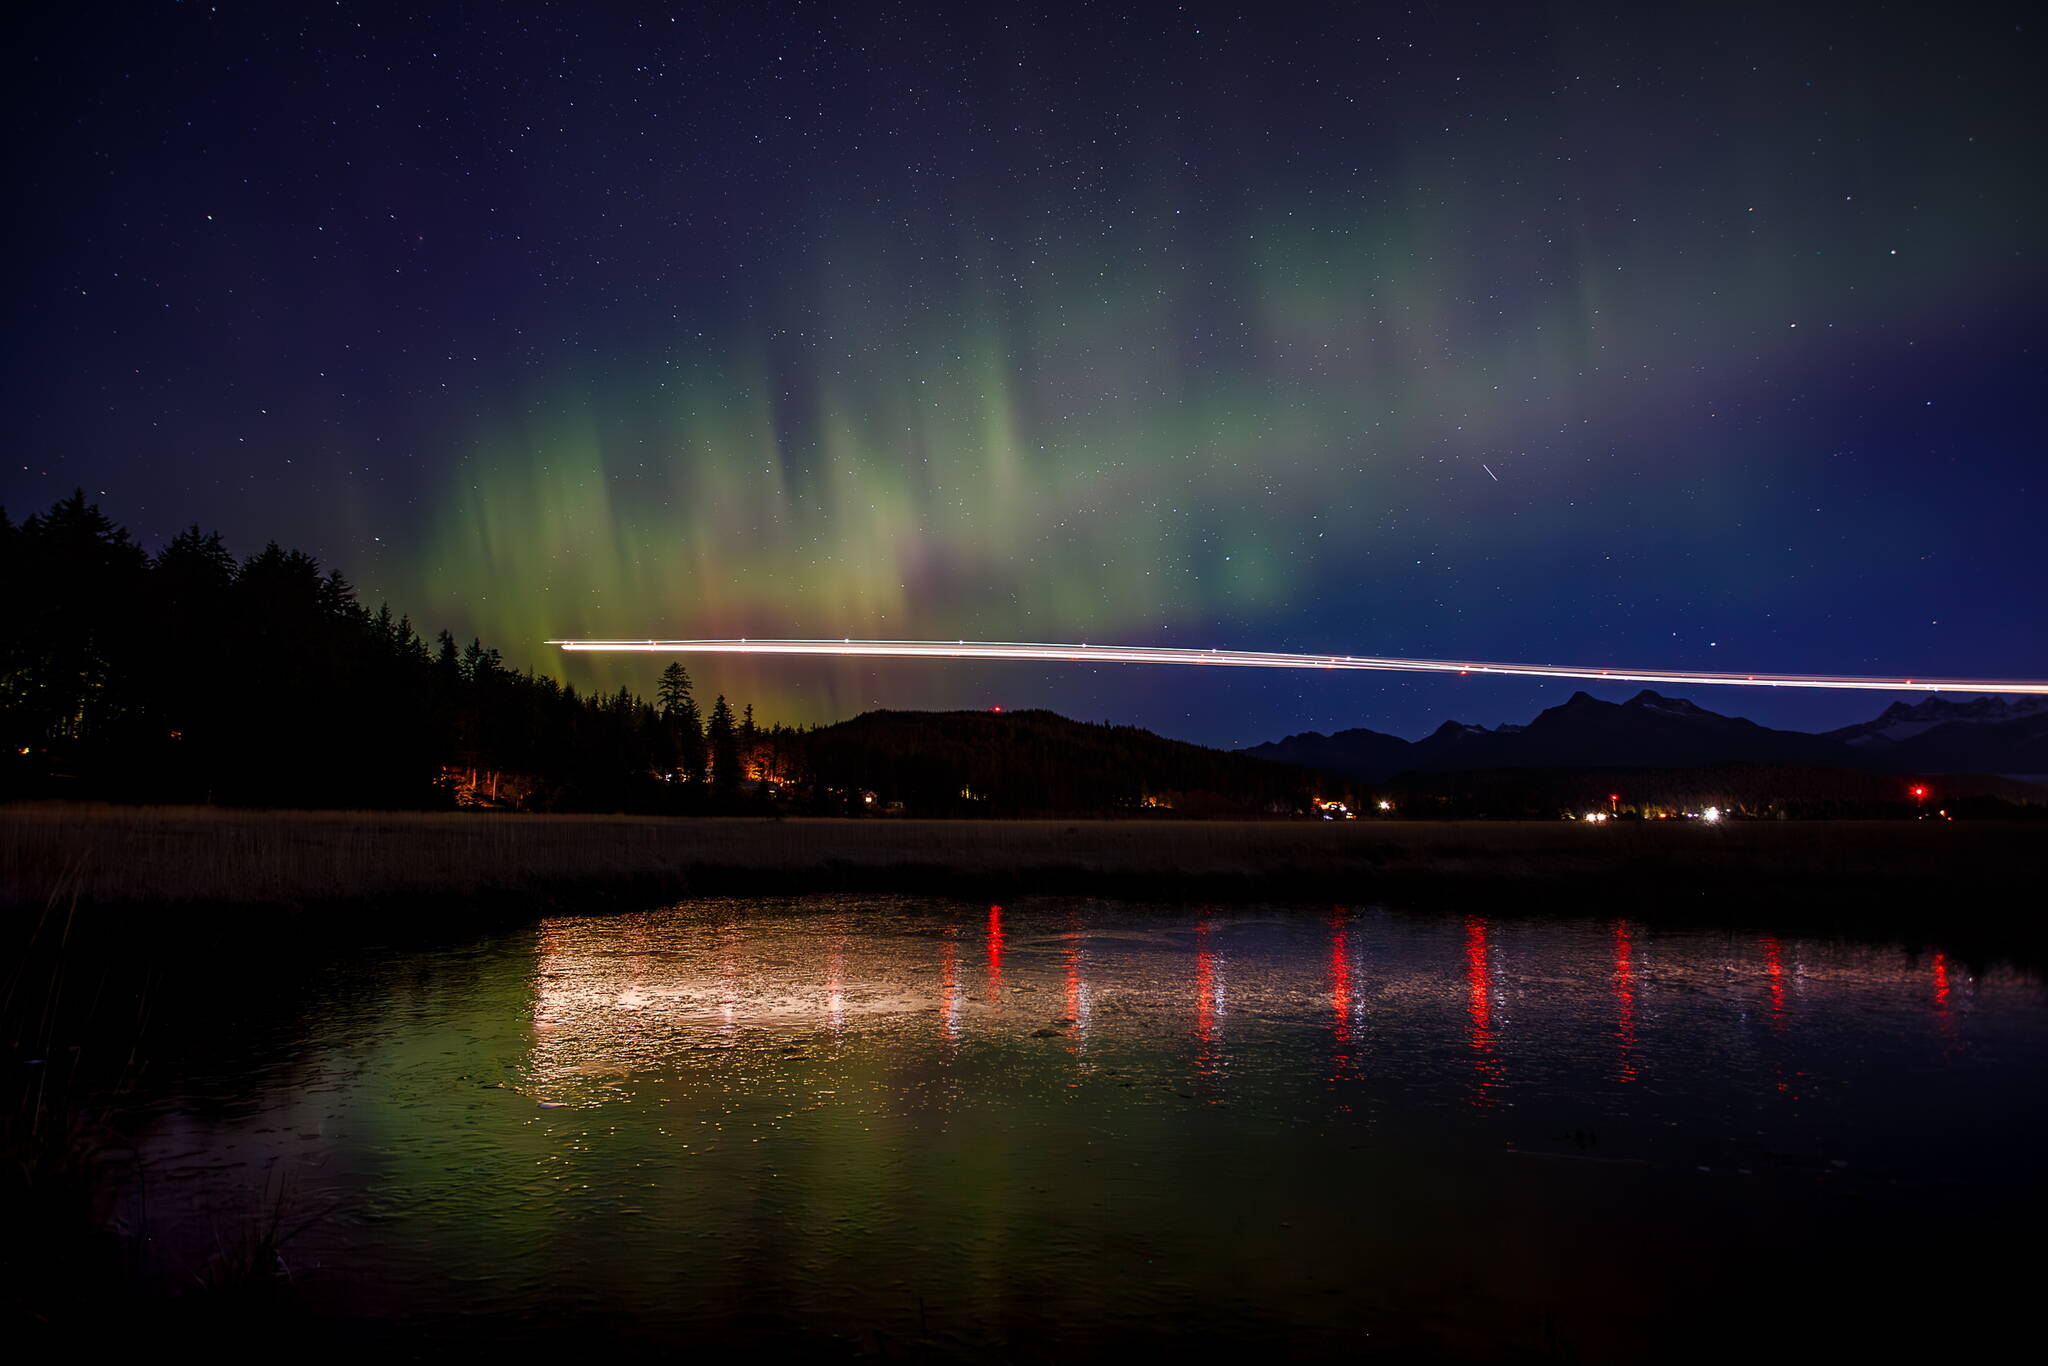 Northern lights seen from flight arriving in Juneau on Oct. 26. (Photo by Jack Beedle)